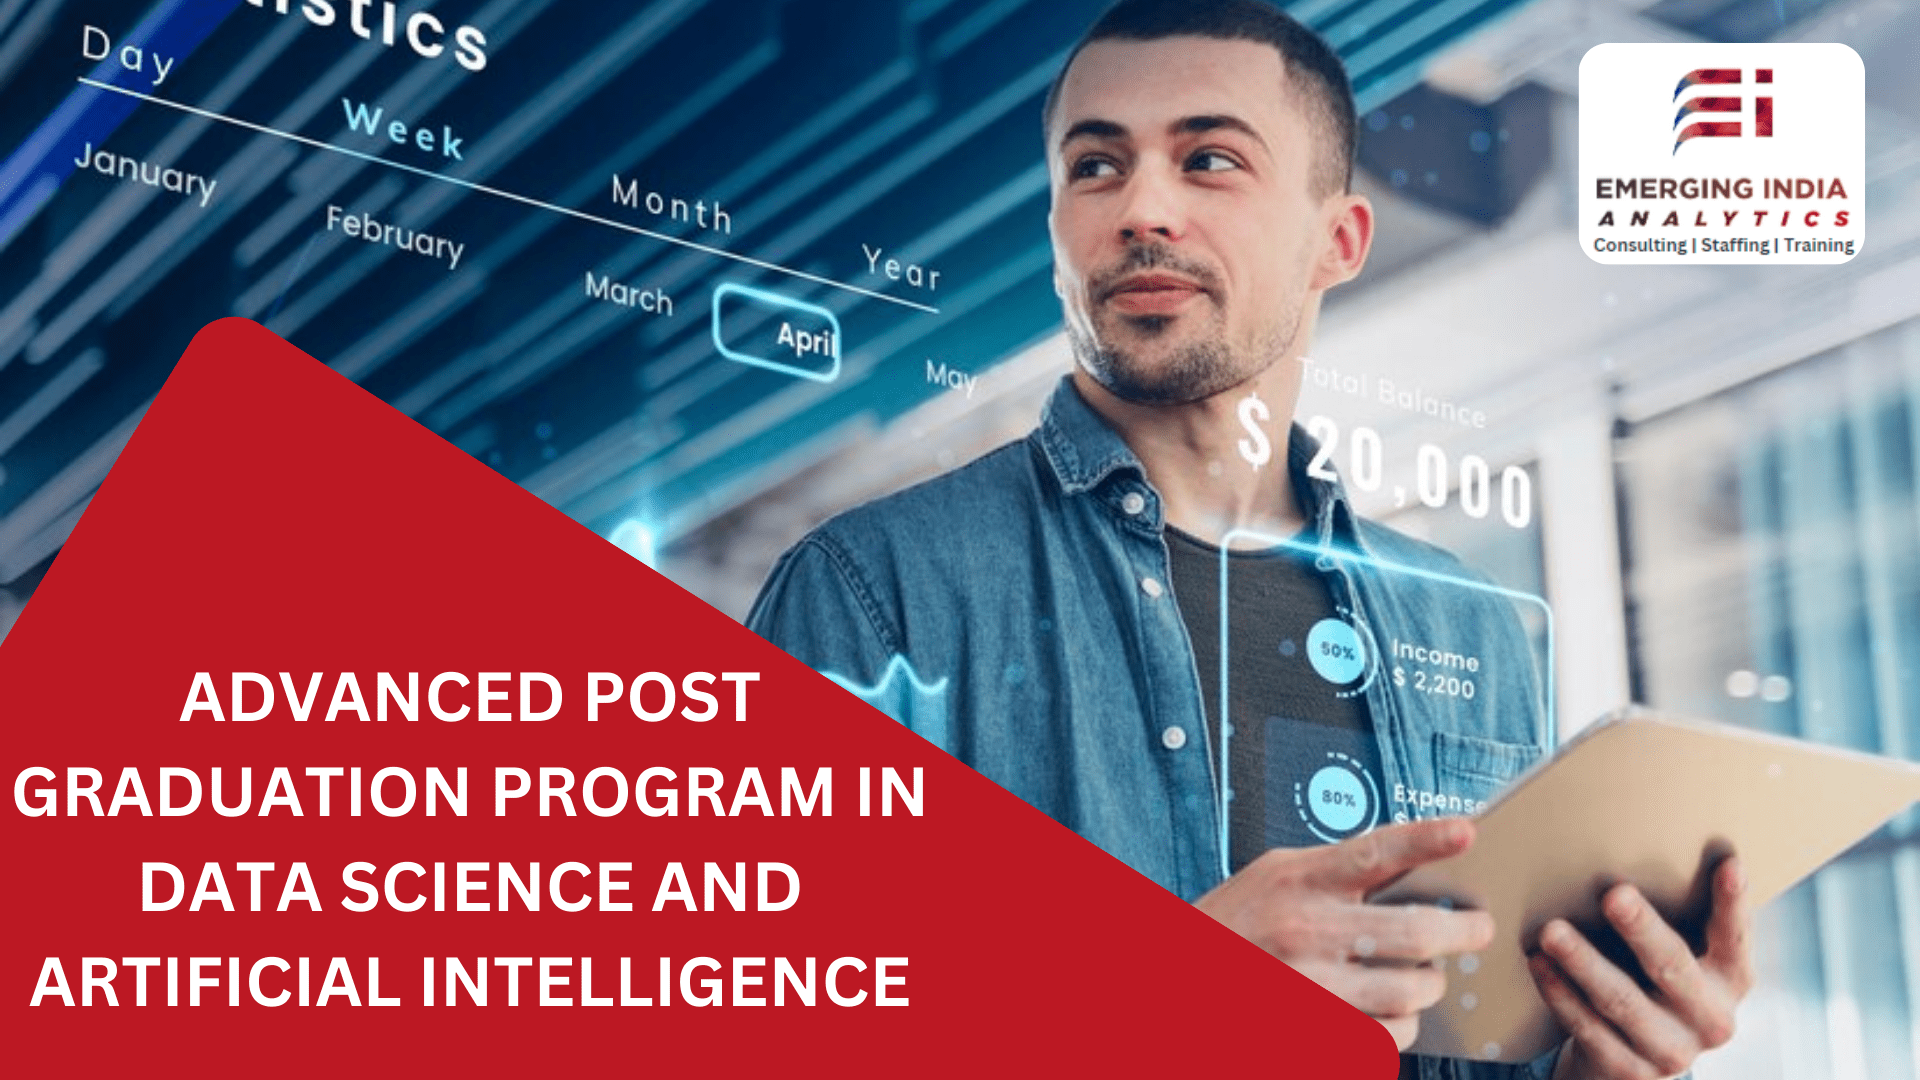 ADVANCED POST GRADUATION PROGRAM IN DATA SCIENCE AND ARTIFICIAL INTELLIGENCE